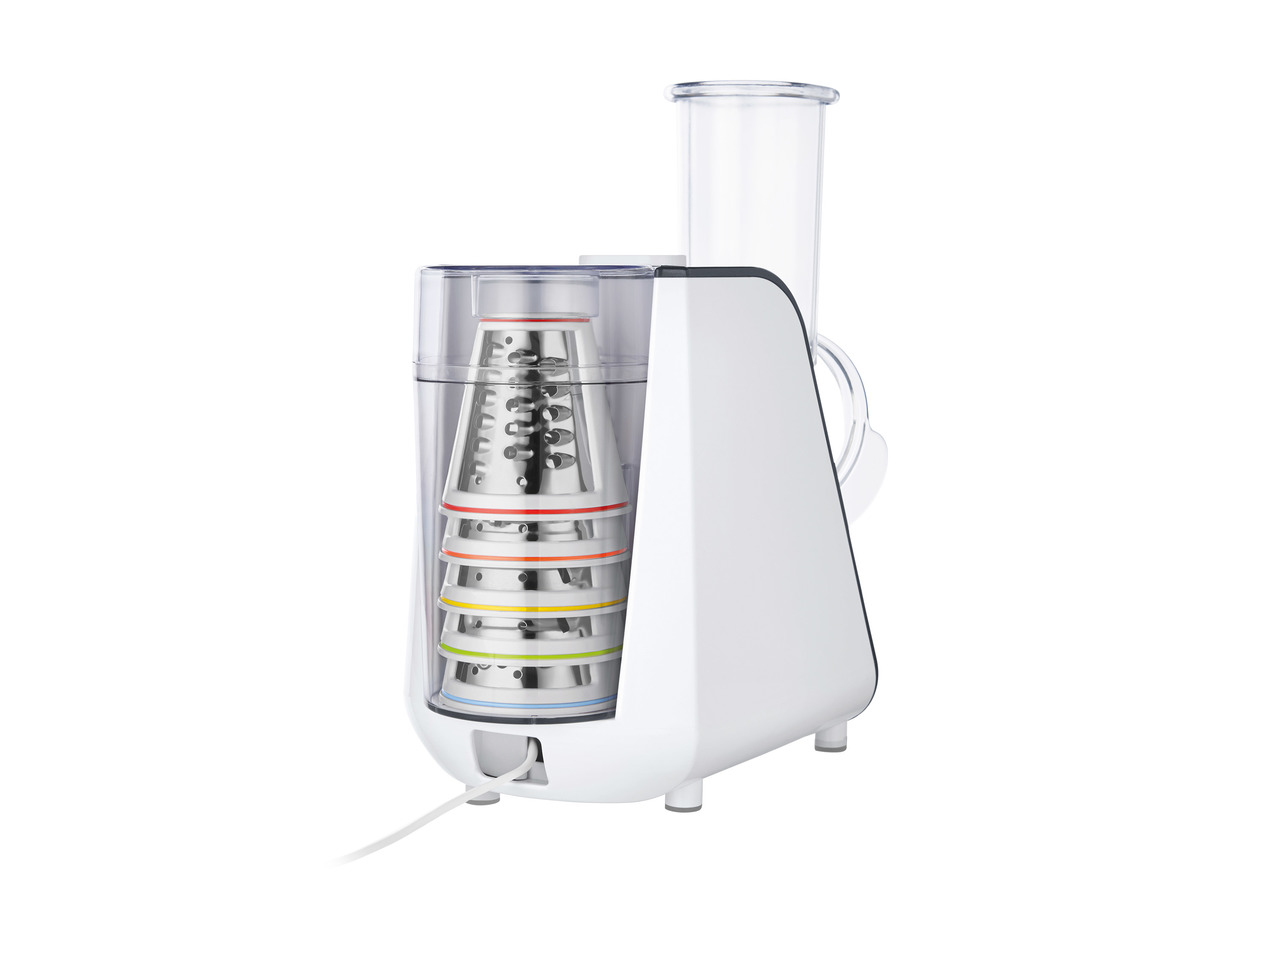 Silvercrest Electric Grater1